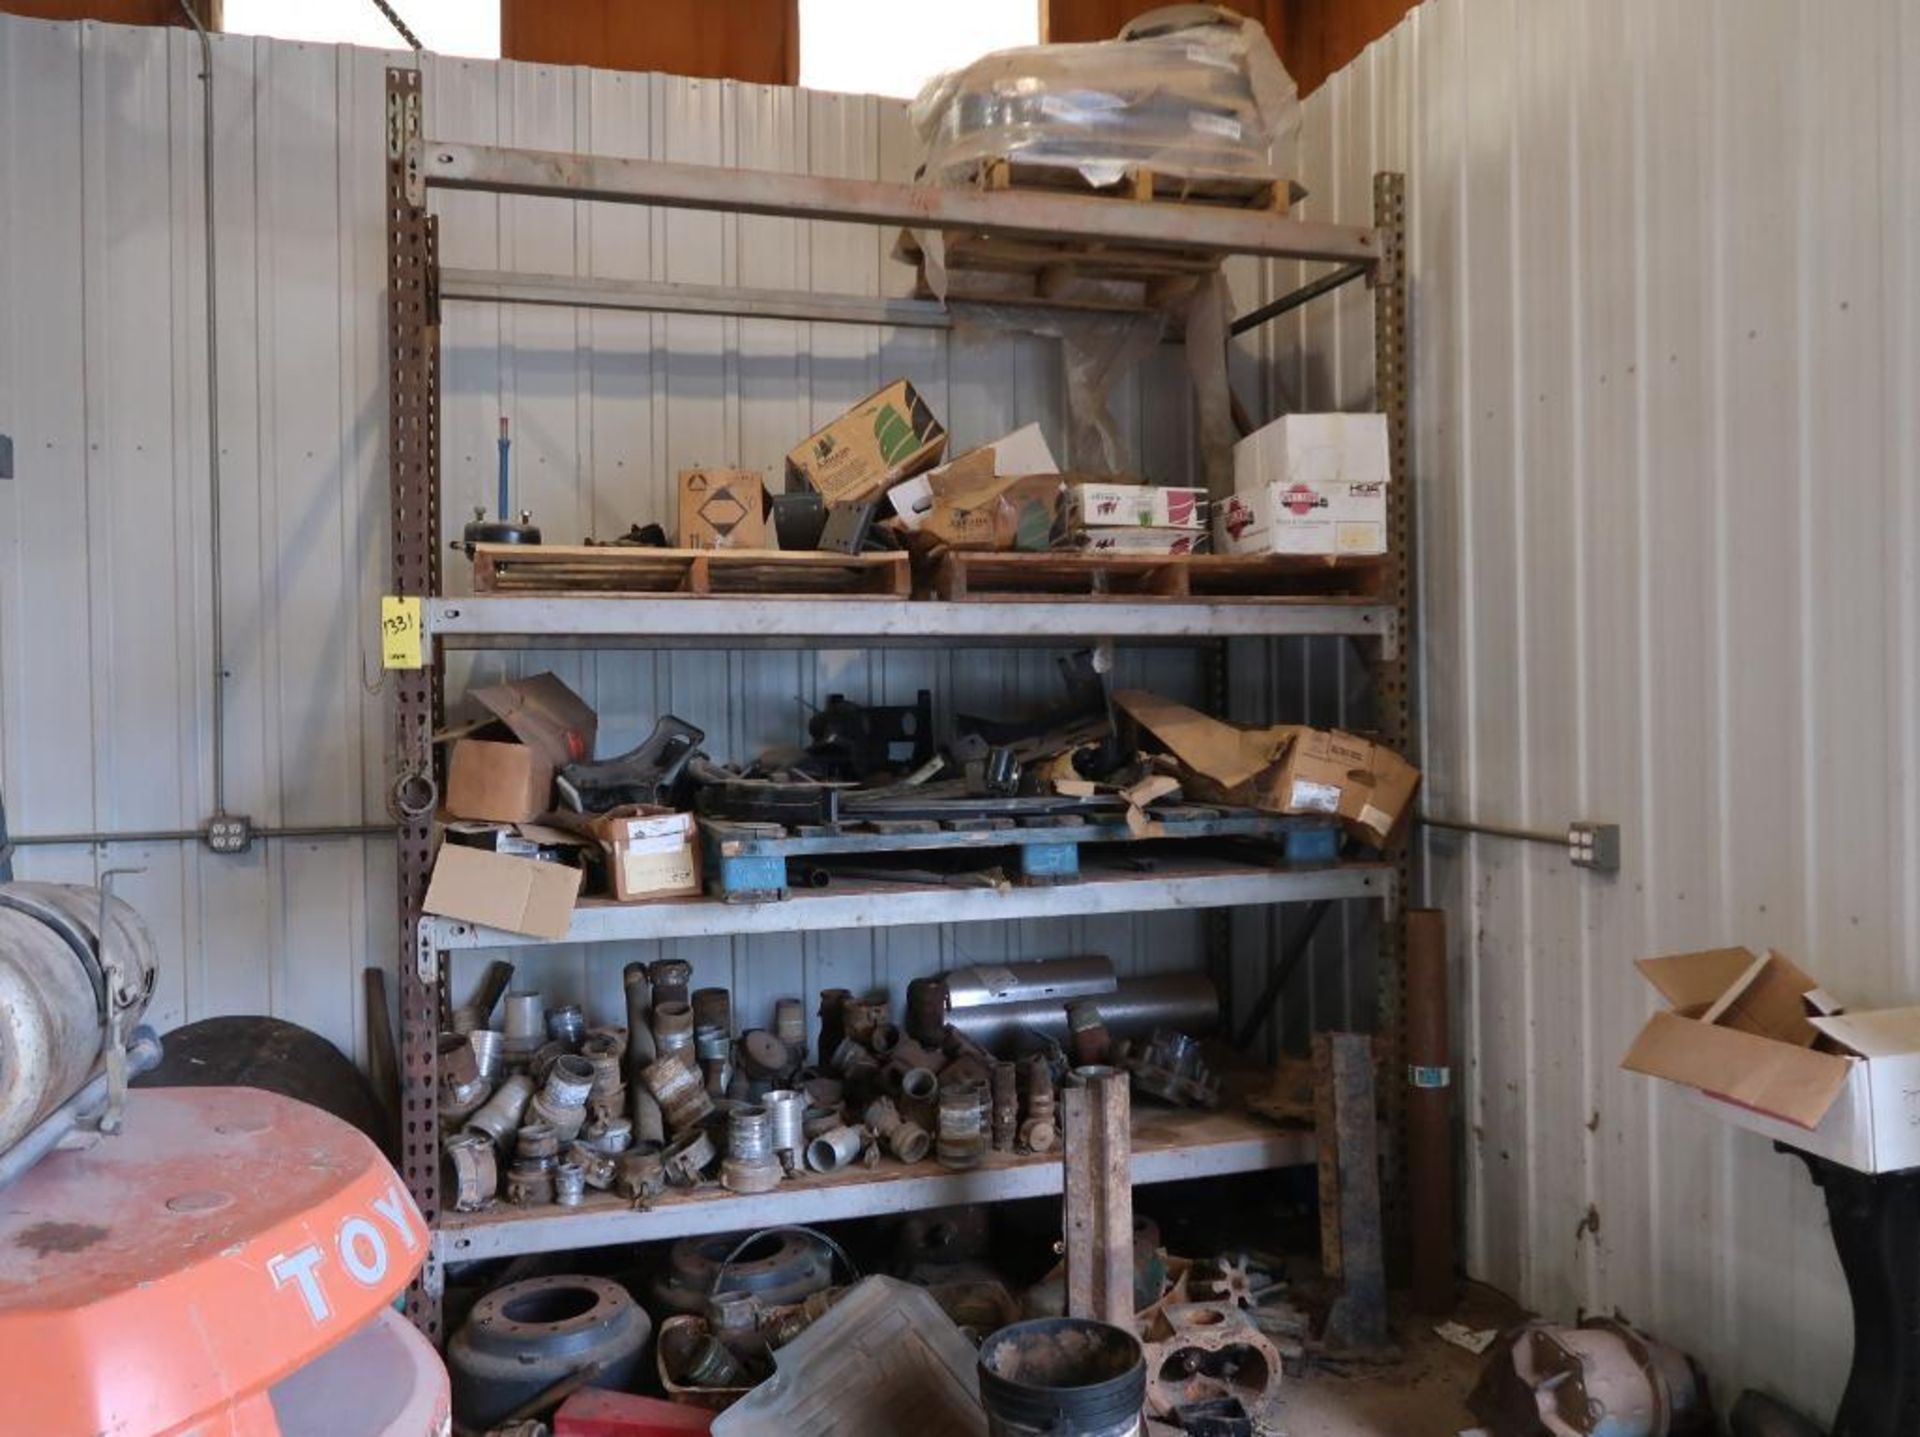 LOT: Balance of Garage Contents including Tools, Work Benches, Vise, Truck Parts, Pallet Rack, - Image 2 of 10